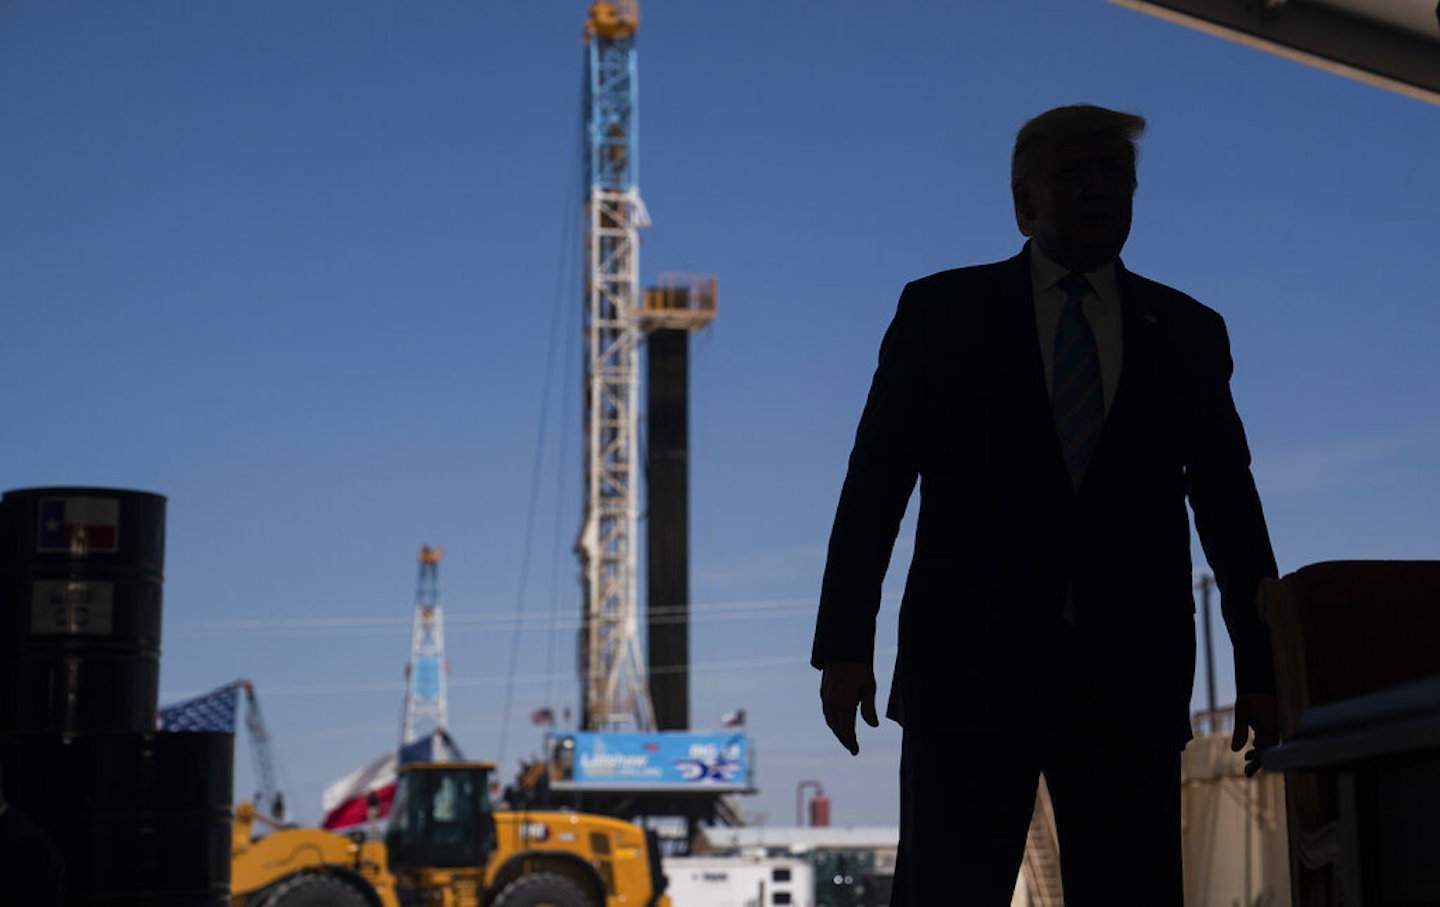 President Donald Trump arrives to deliver remarks about American energy production during a visit to the Double Eagle Energy Oil Rig, Wednesday, July 29, 2020, in Midland, Texas.